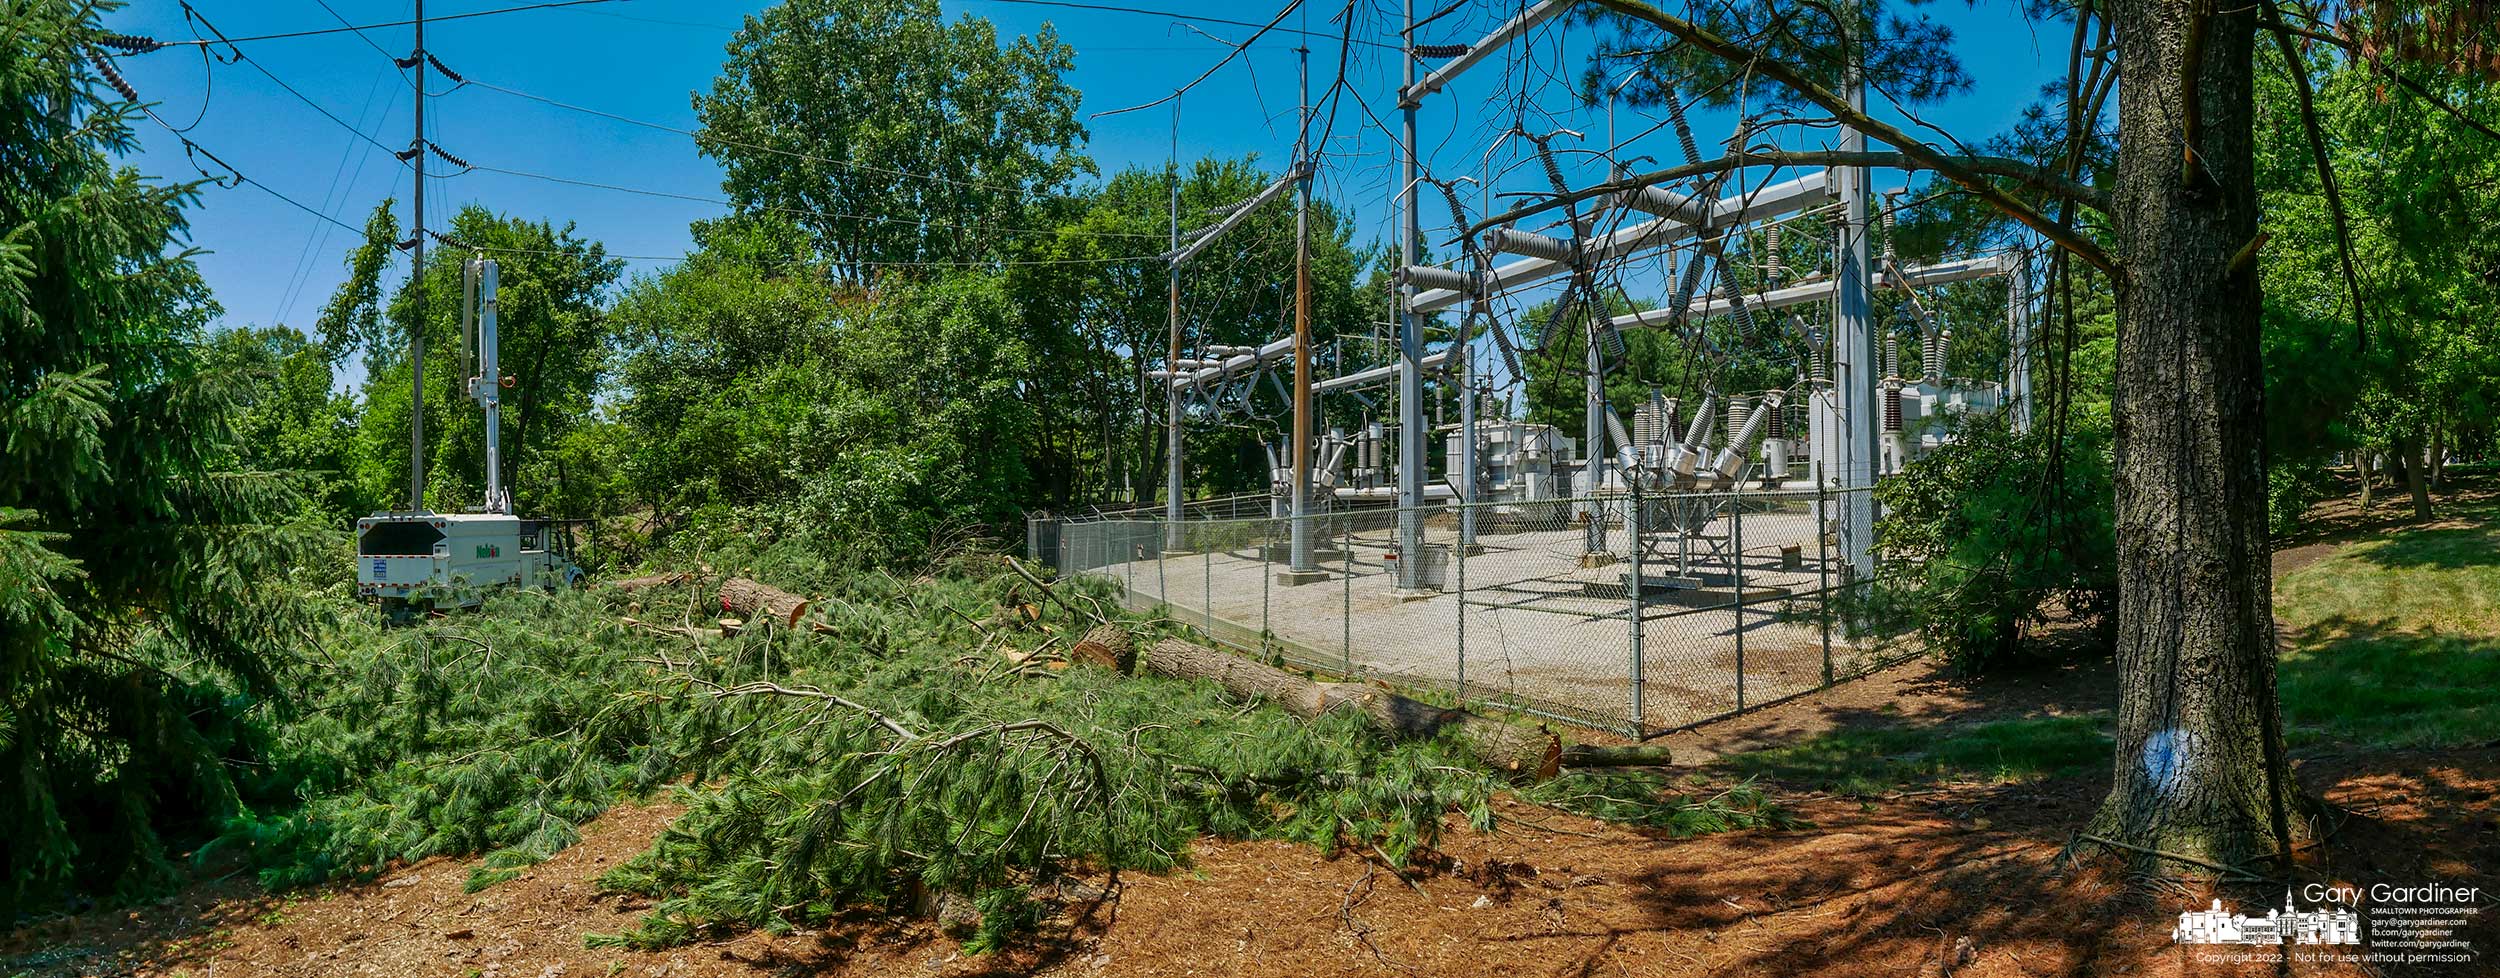 A pine tree near the AEP substation at Spring and Walnut is marked with paint signifying it is to remain in place not like the other pines closer to the power lines that feed the station and were cut down. My Final Photo for June 29, 2022.